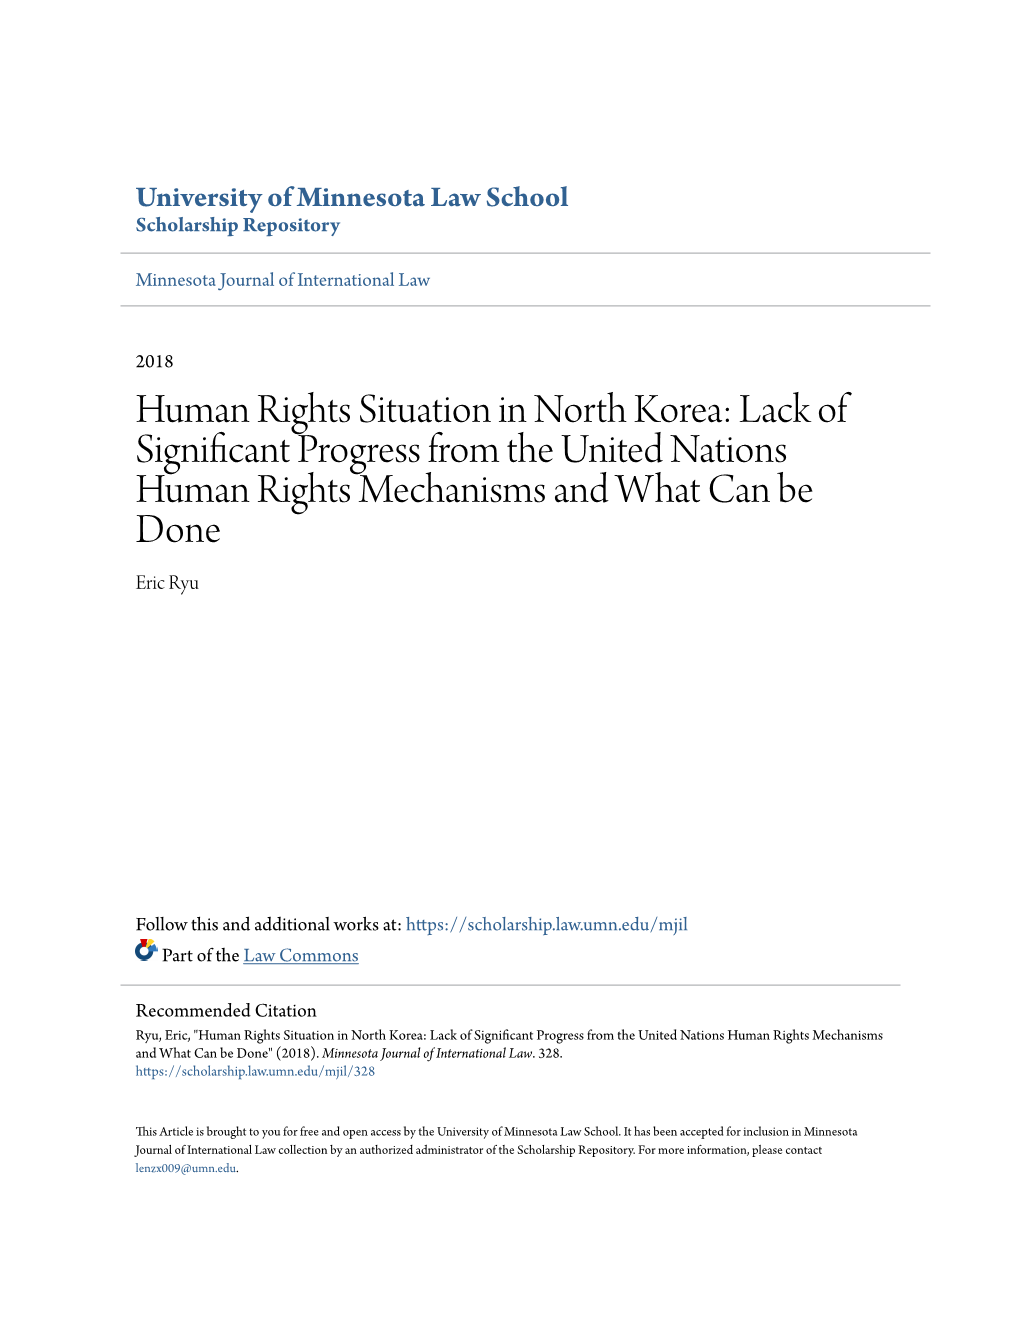 Human Rights Situation in North Korea: Lack of Significant Progress from the United Nations Human Rights Mechanisms and What Can Be Done Eric Ryu